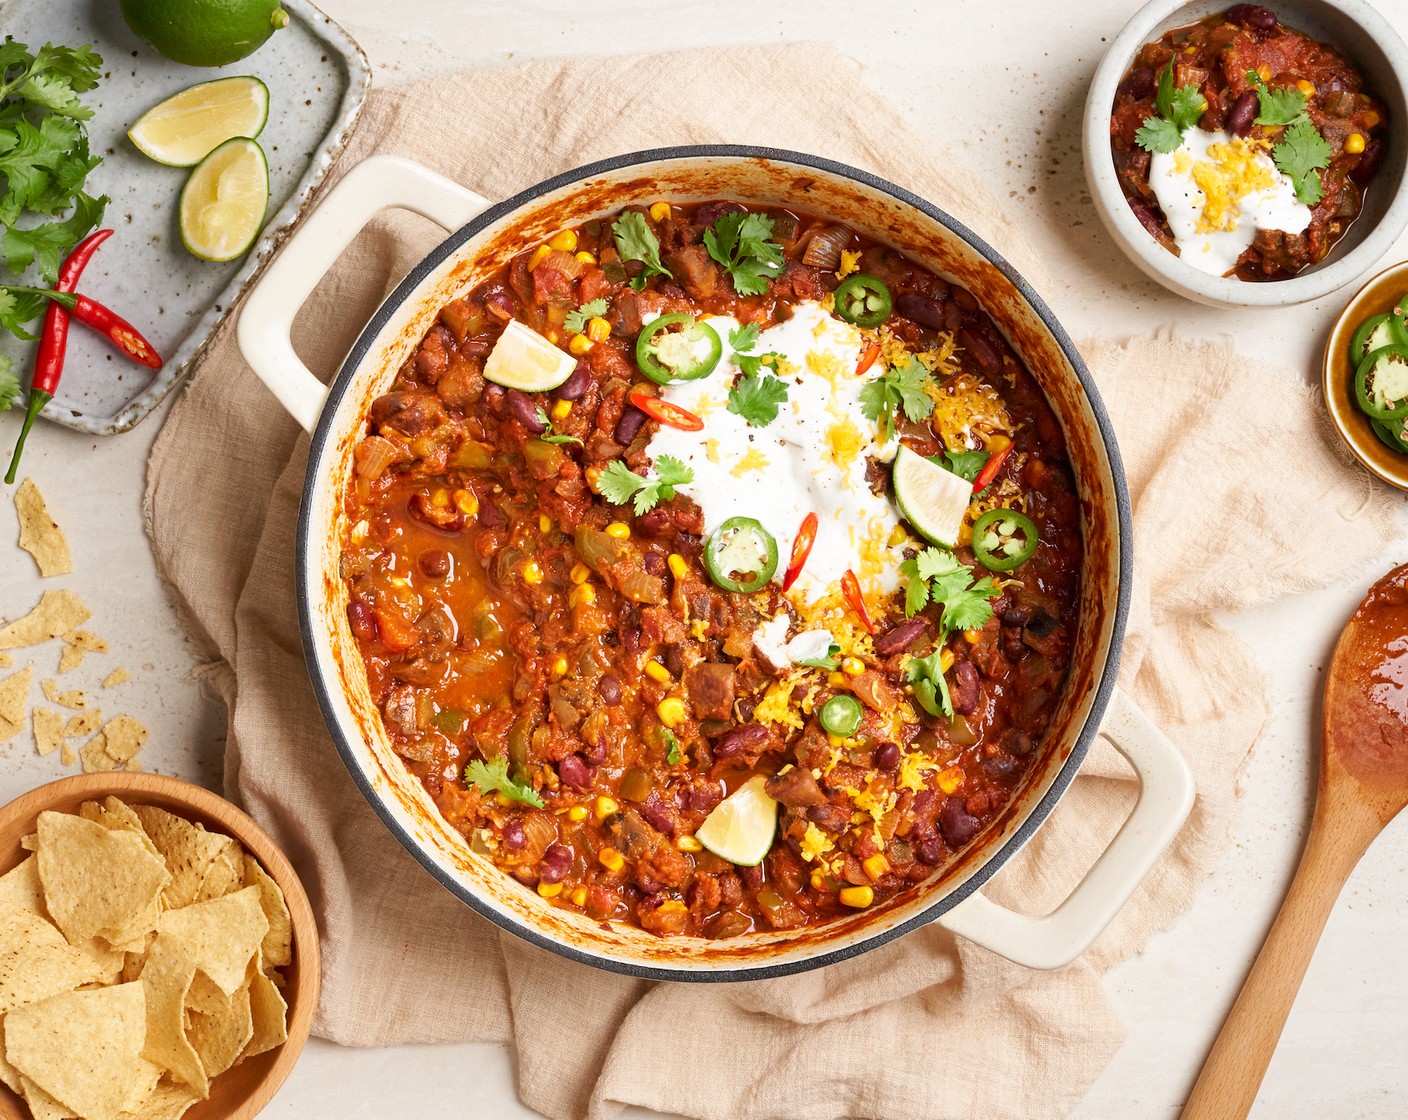 step 9 Serve the vegetarian chili hot in bowls. Top each serving with a dollop of Sour Cream (3 Tbsp), Fresh Cilantro Leaf (1/4 cup), Cheddar Cheese (1/4 cup), and Tortilla Chips (6 1/2 cups) for some added crunch.